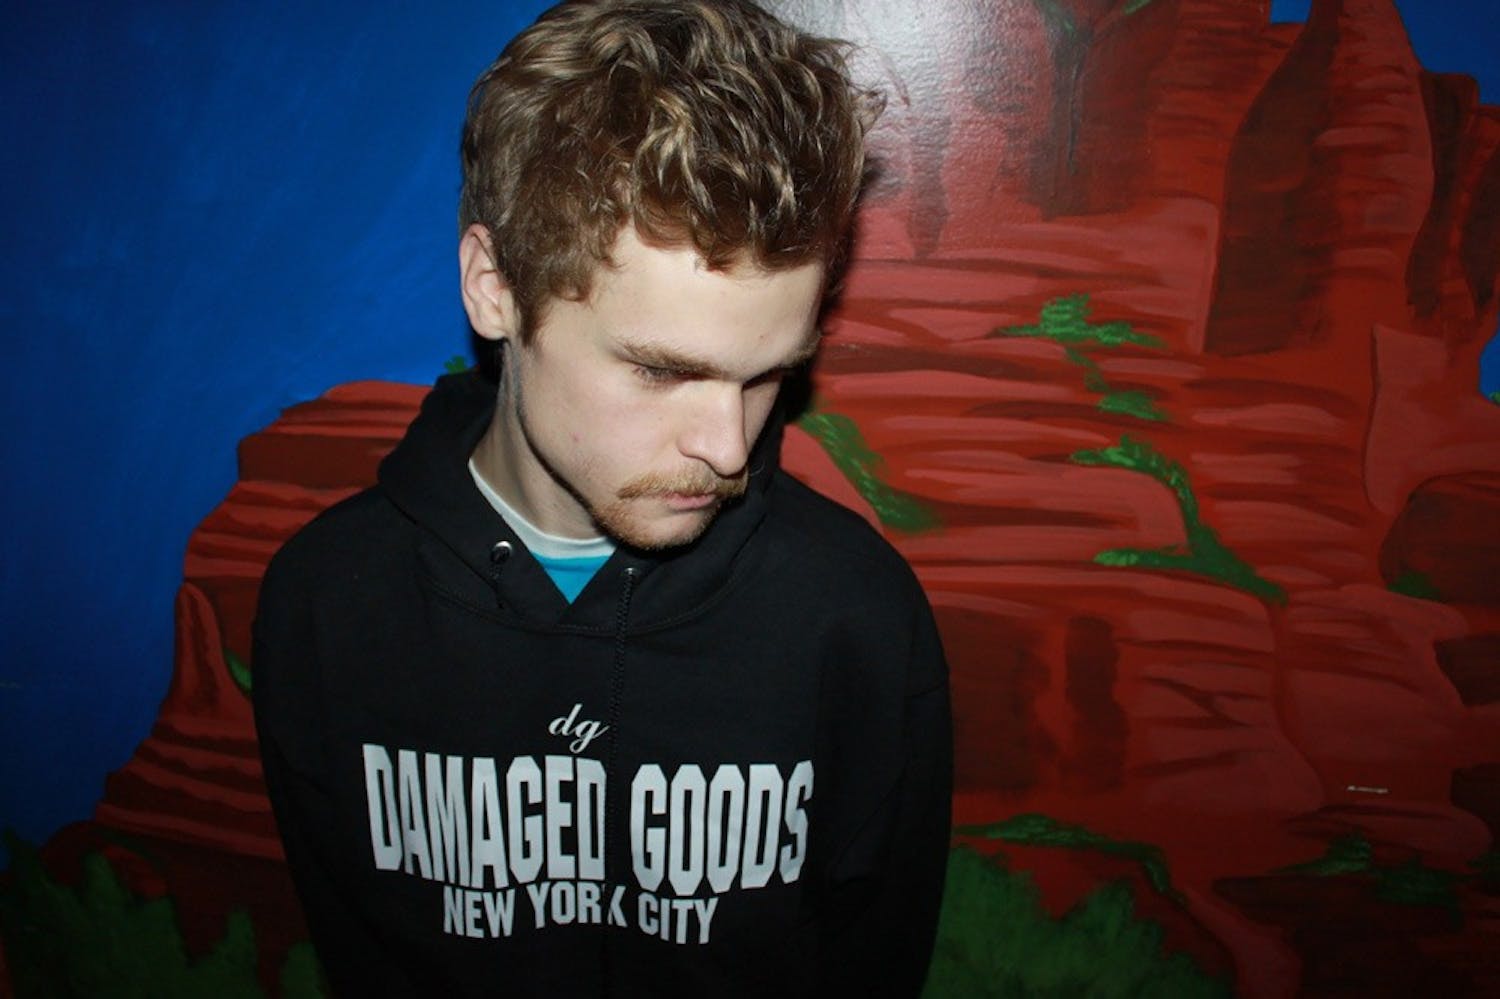 Slug Christ’s style of rapping is similar to that of Tyler, the Creator and Three 6 Mafia’s tracks, with dark undertones and a unique beat.